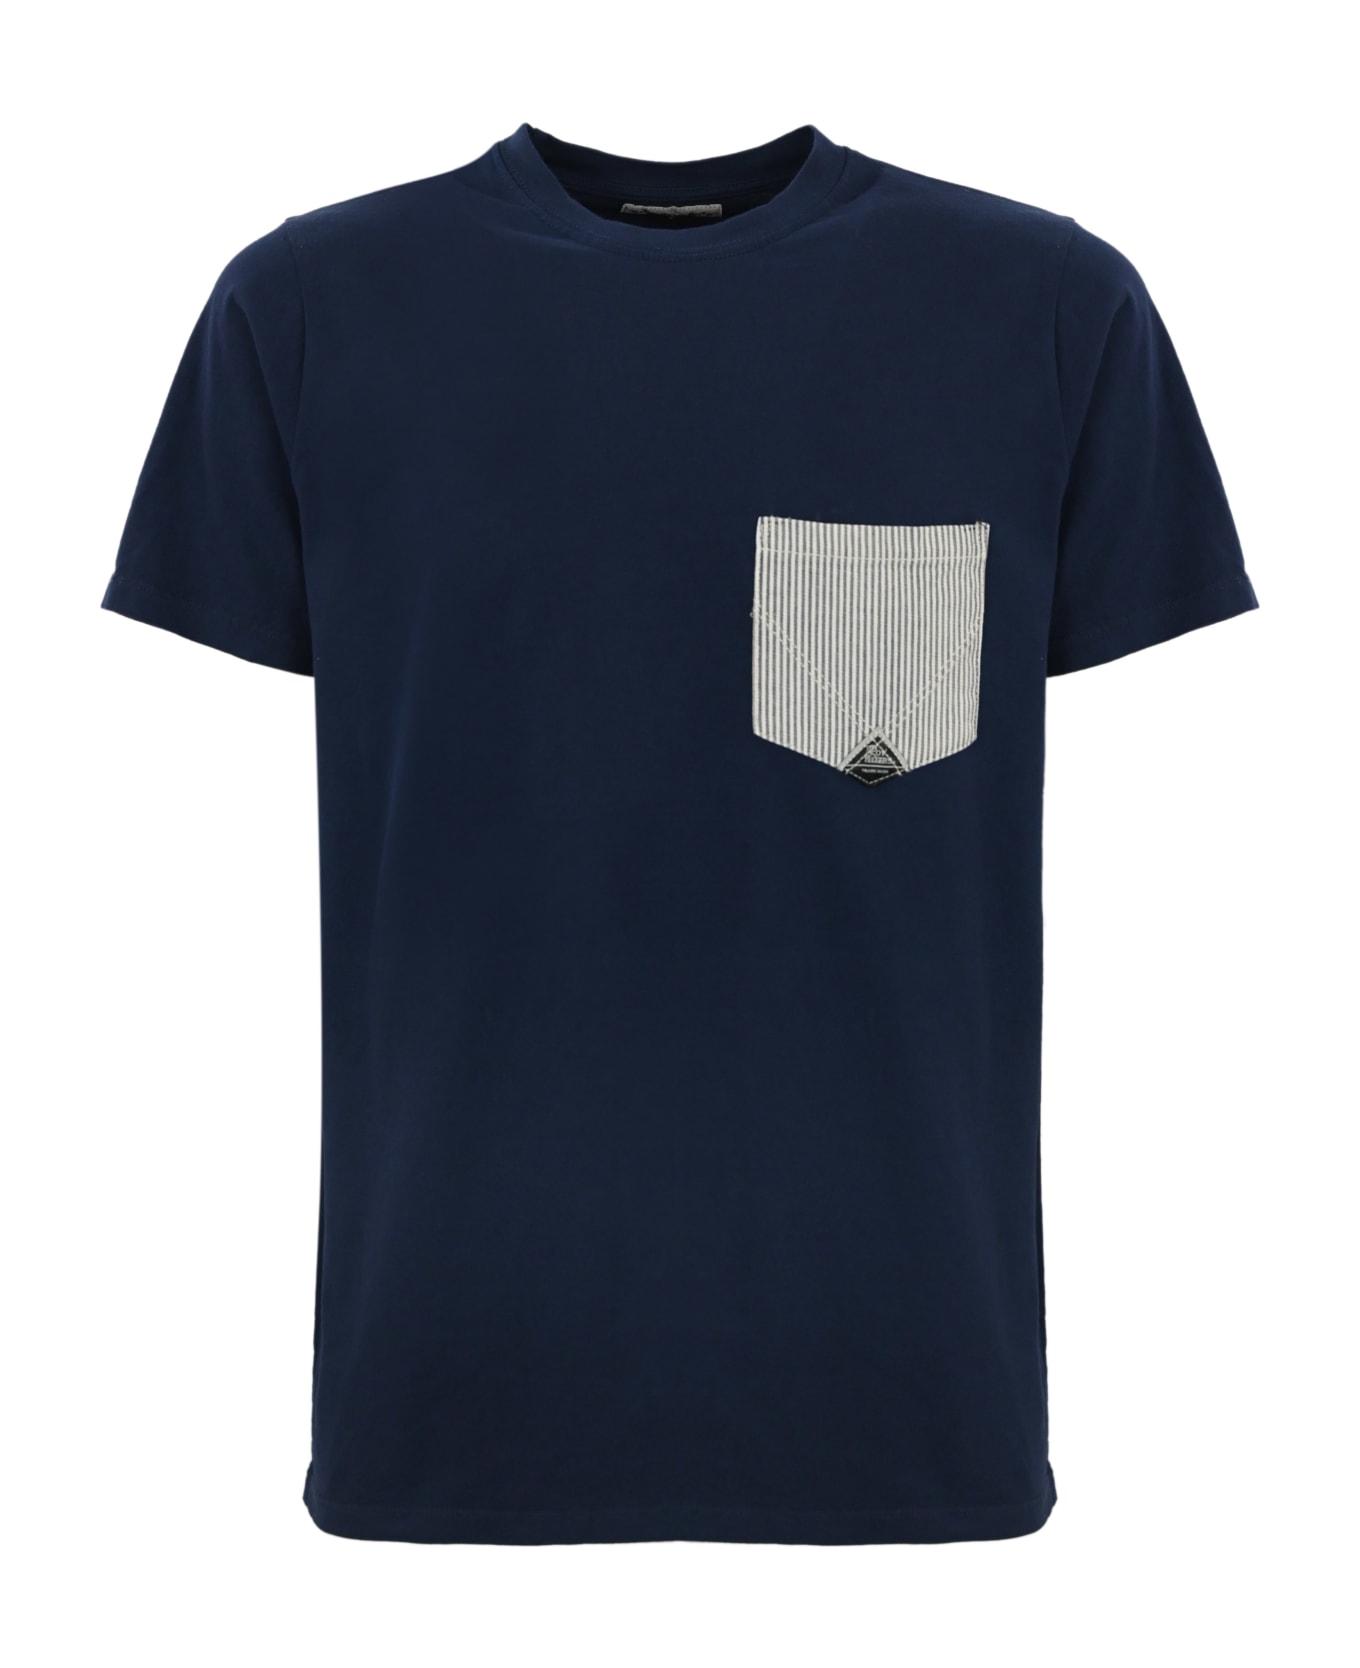 Roy Rogers Blue Cotton T-shirt With Pocket - Navy blue